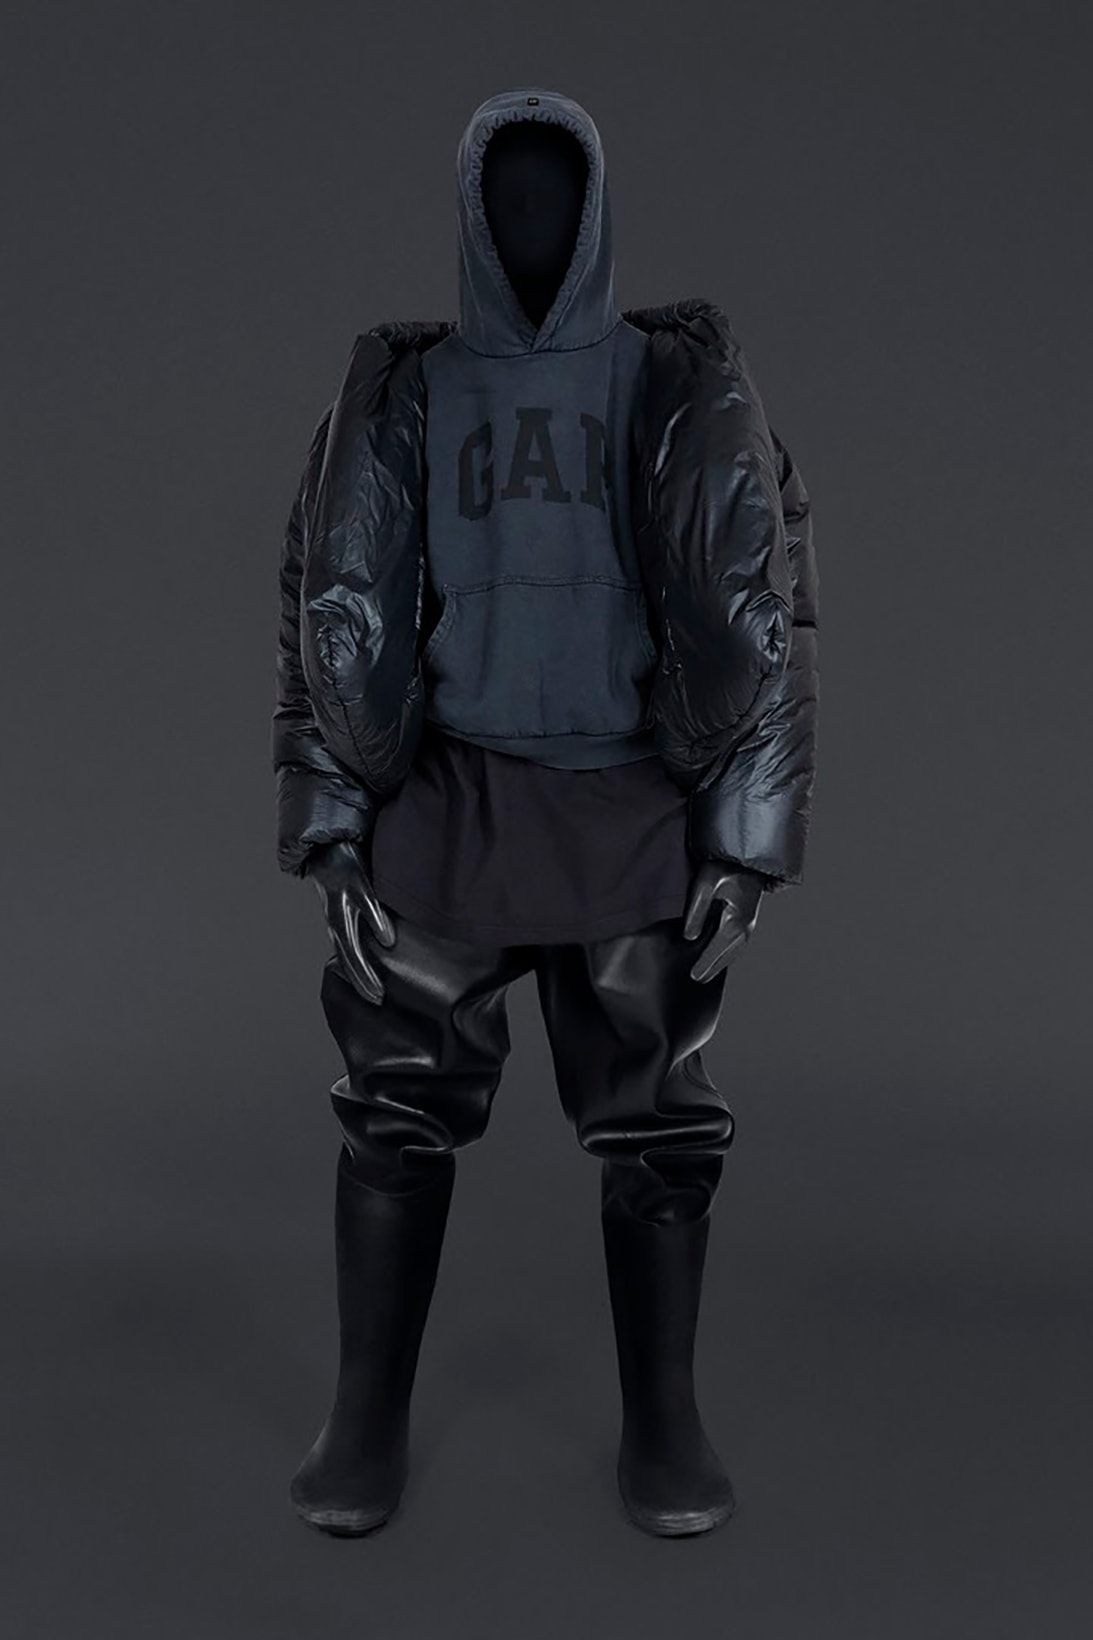 YEEZY Gap Engineered by Balenciaga Collaboration Collection Drop 2 